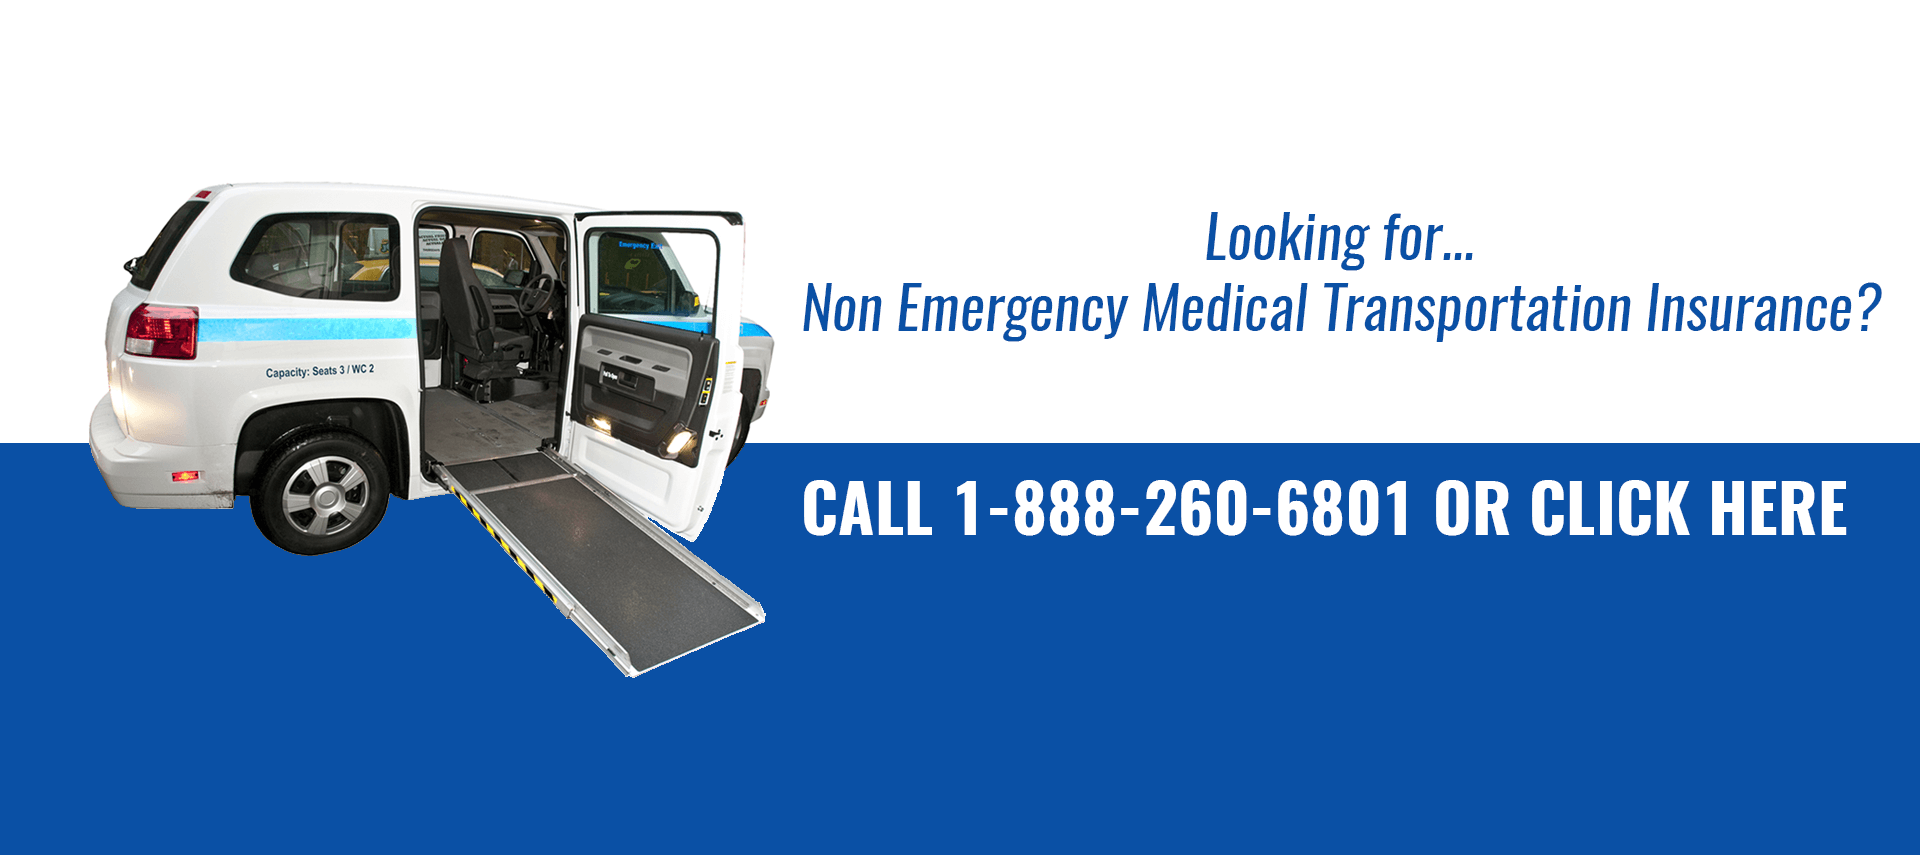 Looking For Non Emergency Medical Transportation Insurance?